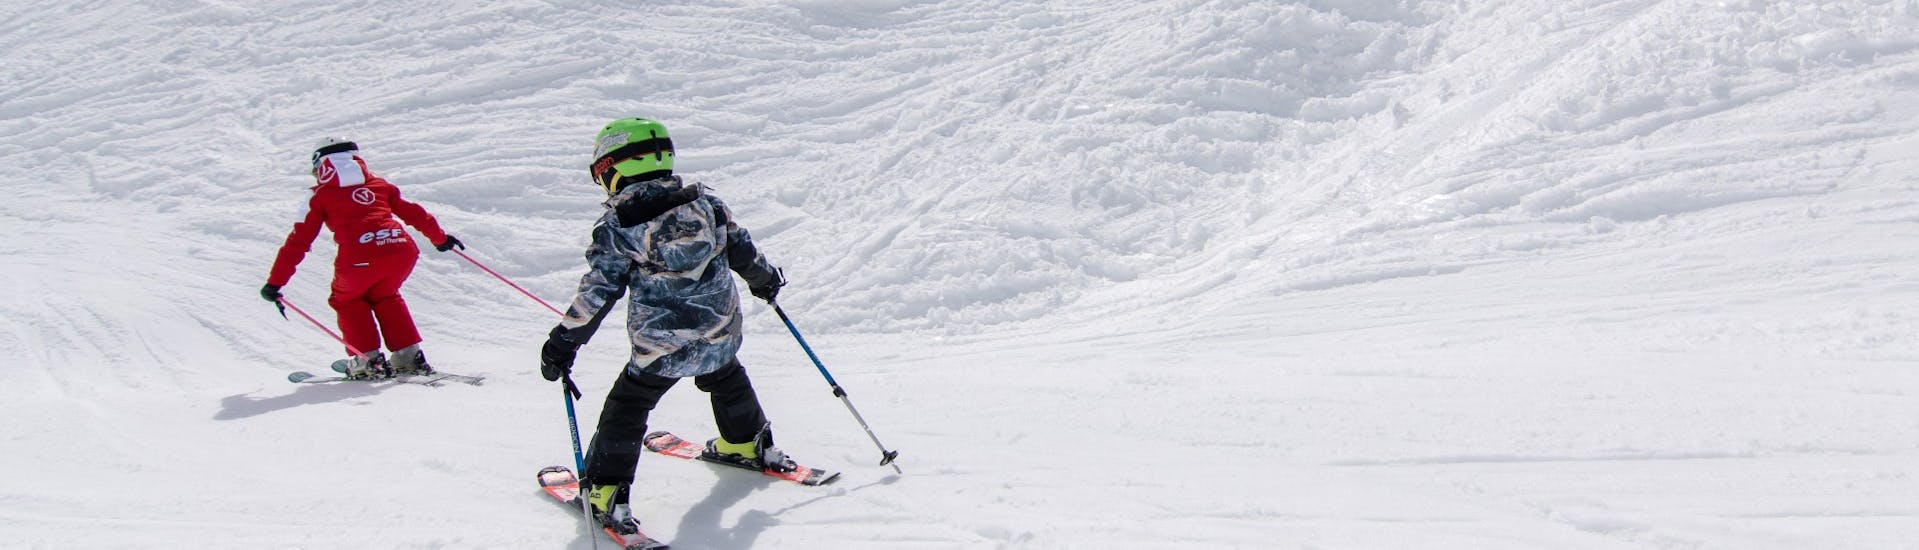 A young skier follows his instructor on the slopes during a private ski lesson for kids with the ESF Val Thorens.